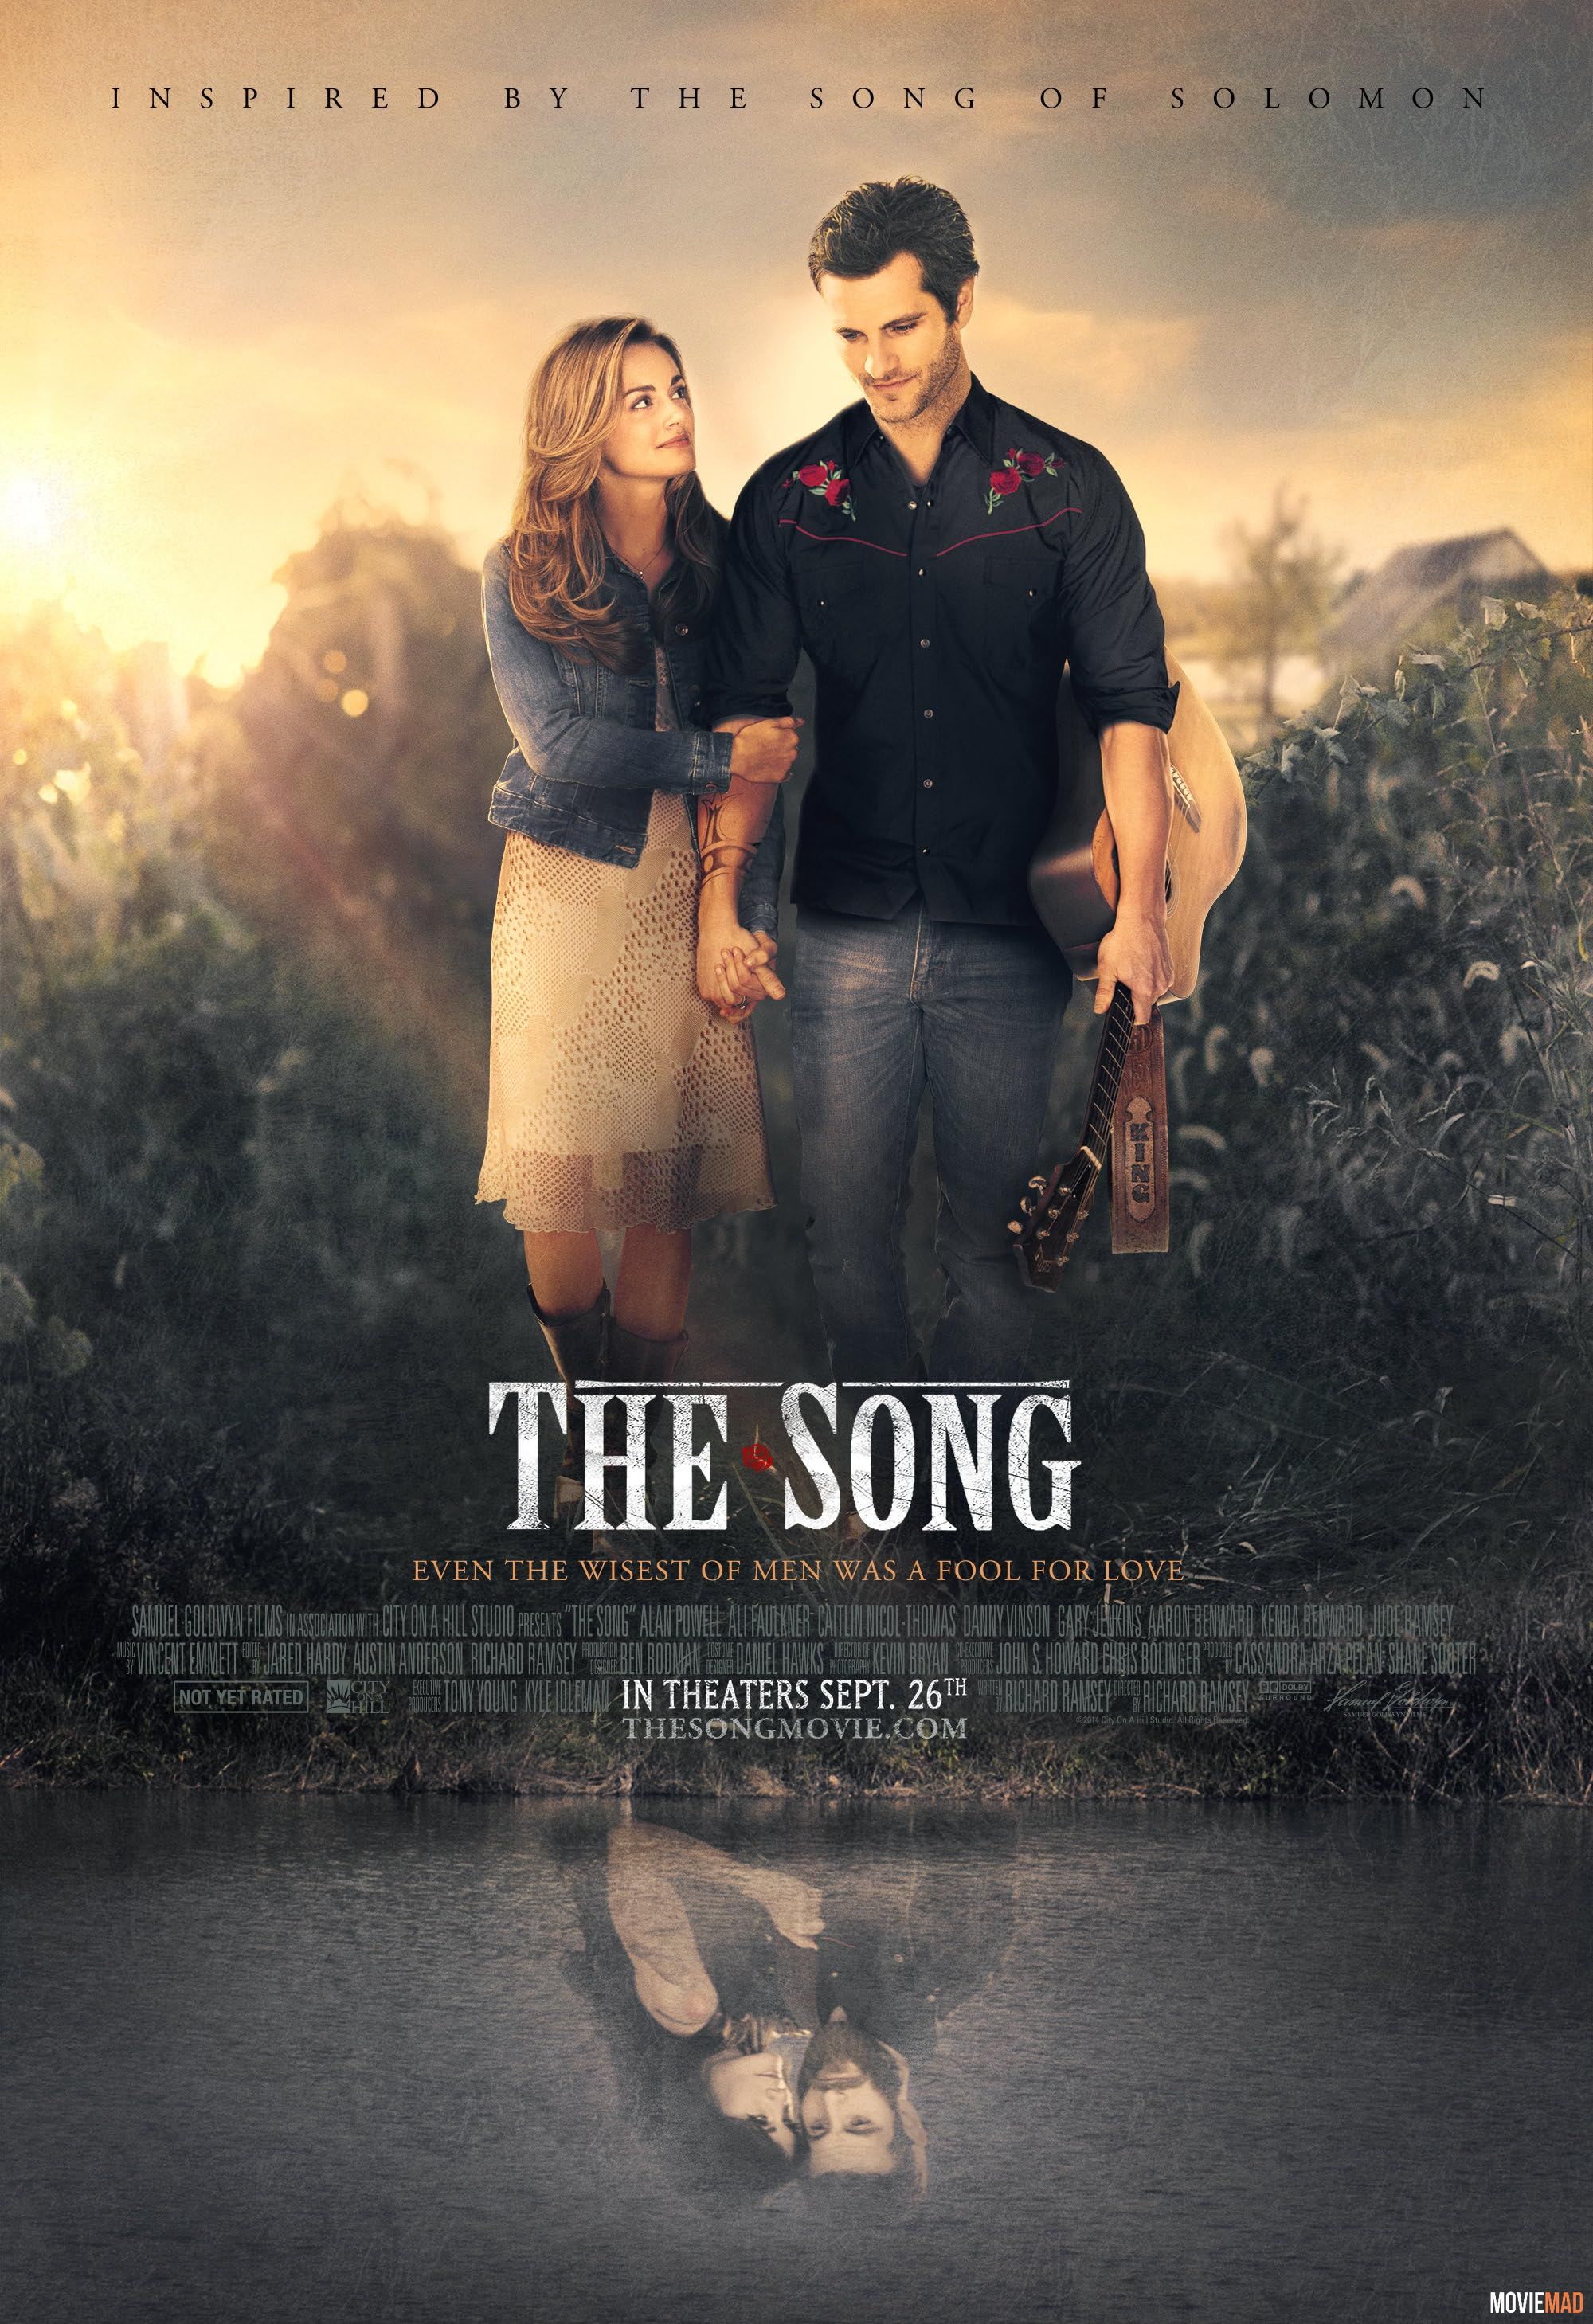 The Song 2014 Hindi Dubbed Full Movie HDRip